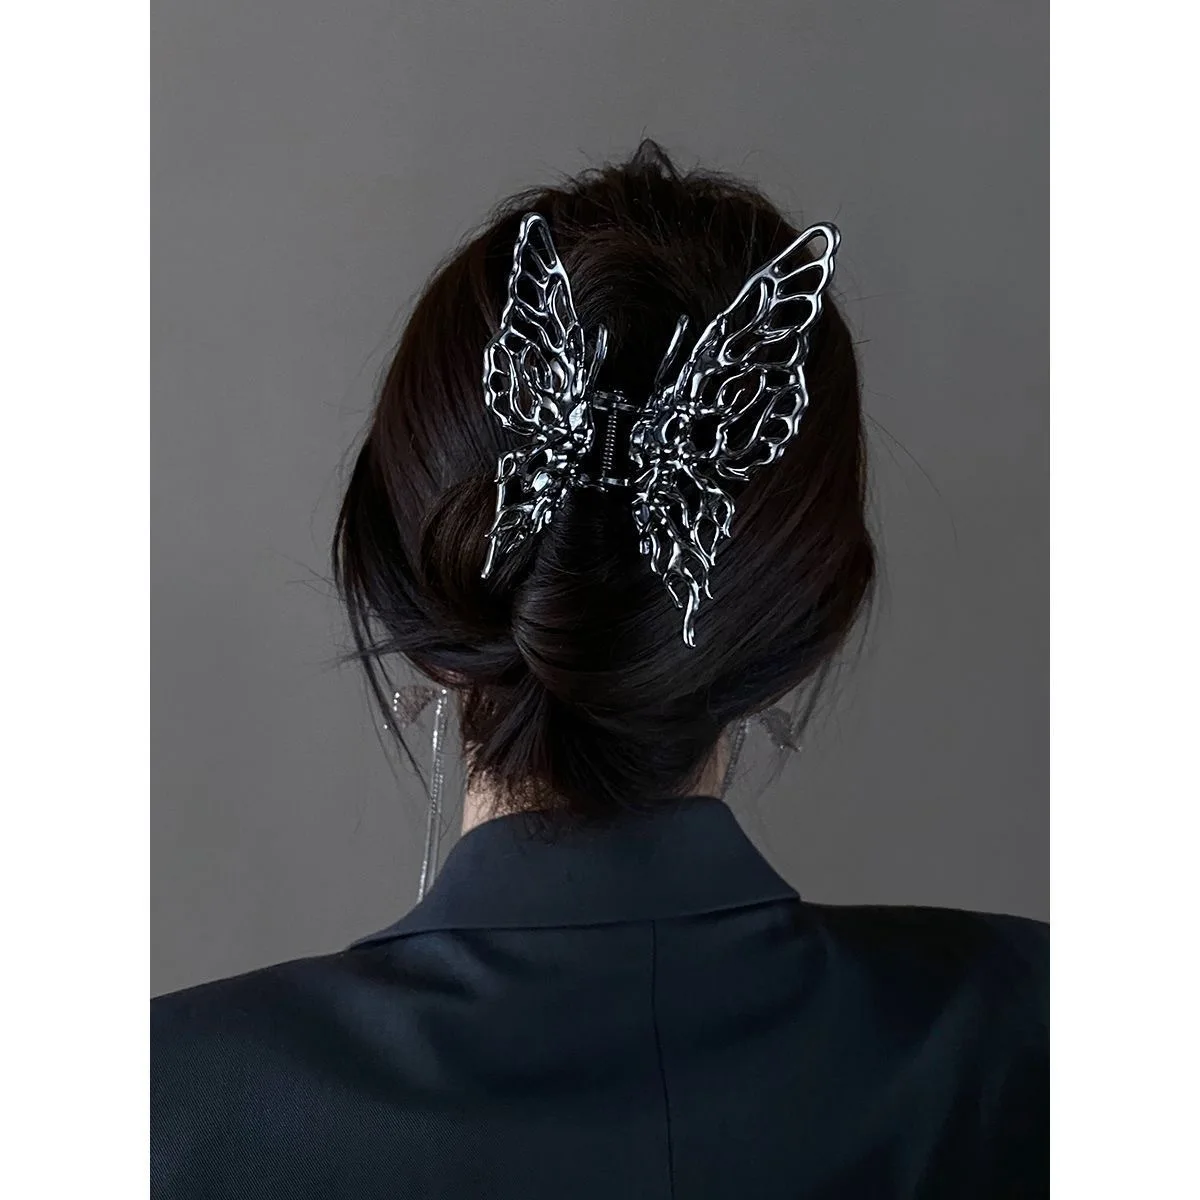 New Korea Bright Silver Cross Geometric Hairpin Butterfly Grab Clip Rose Flower Hair Claw Woman Girls Styling Barrette Headdress two colors 116 60 49cm 120kg silver white bright oxidation aluminum flat tube rose oxford cloth carrying bag director s chair